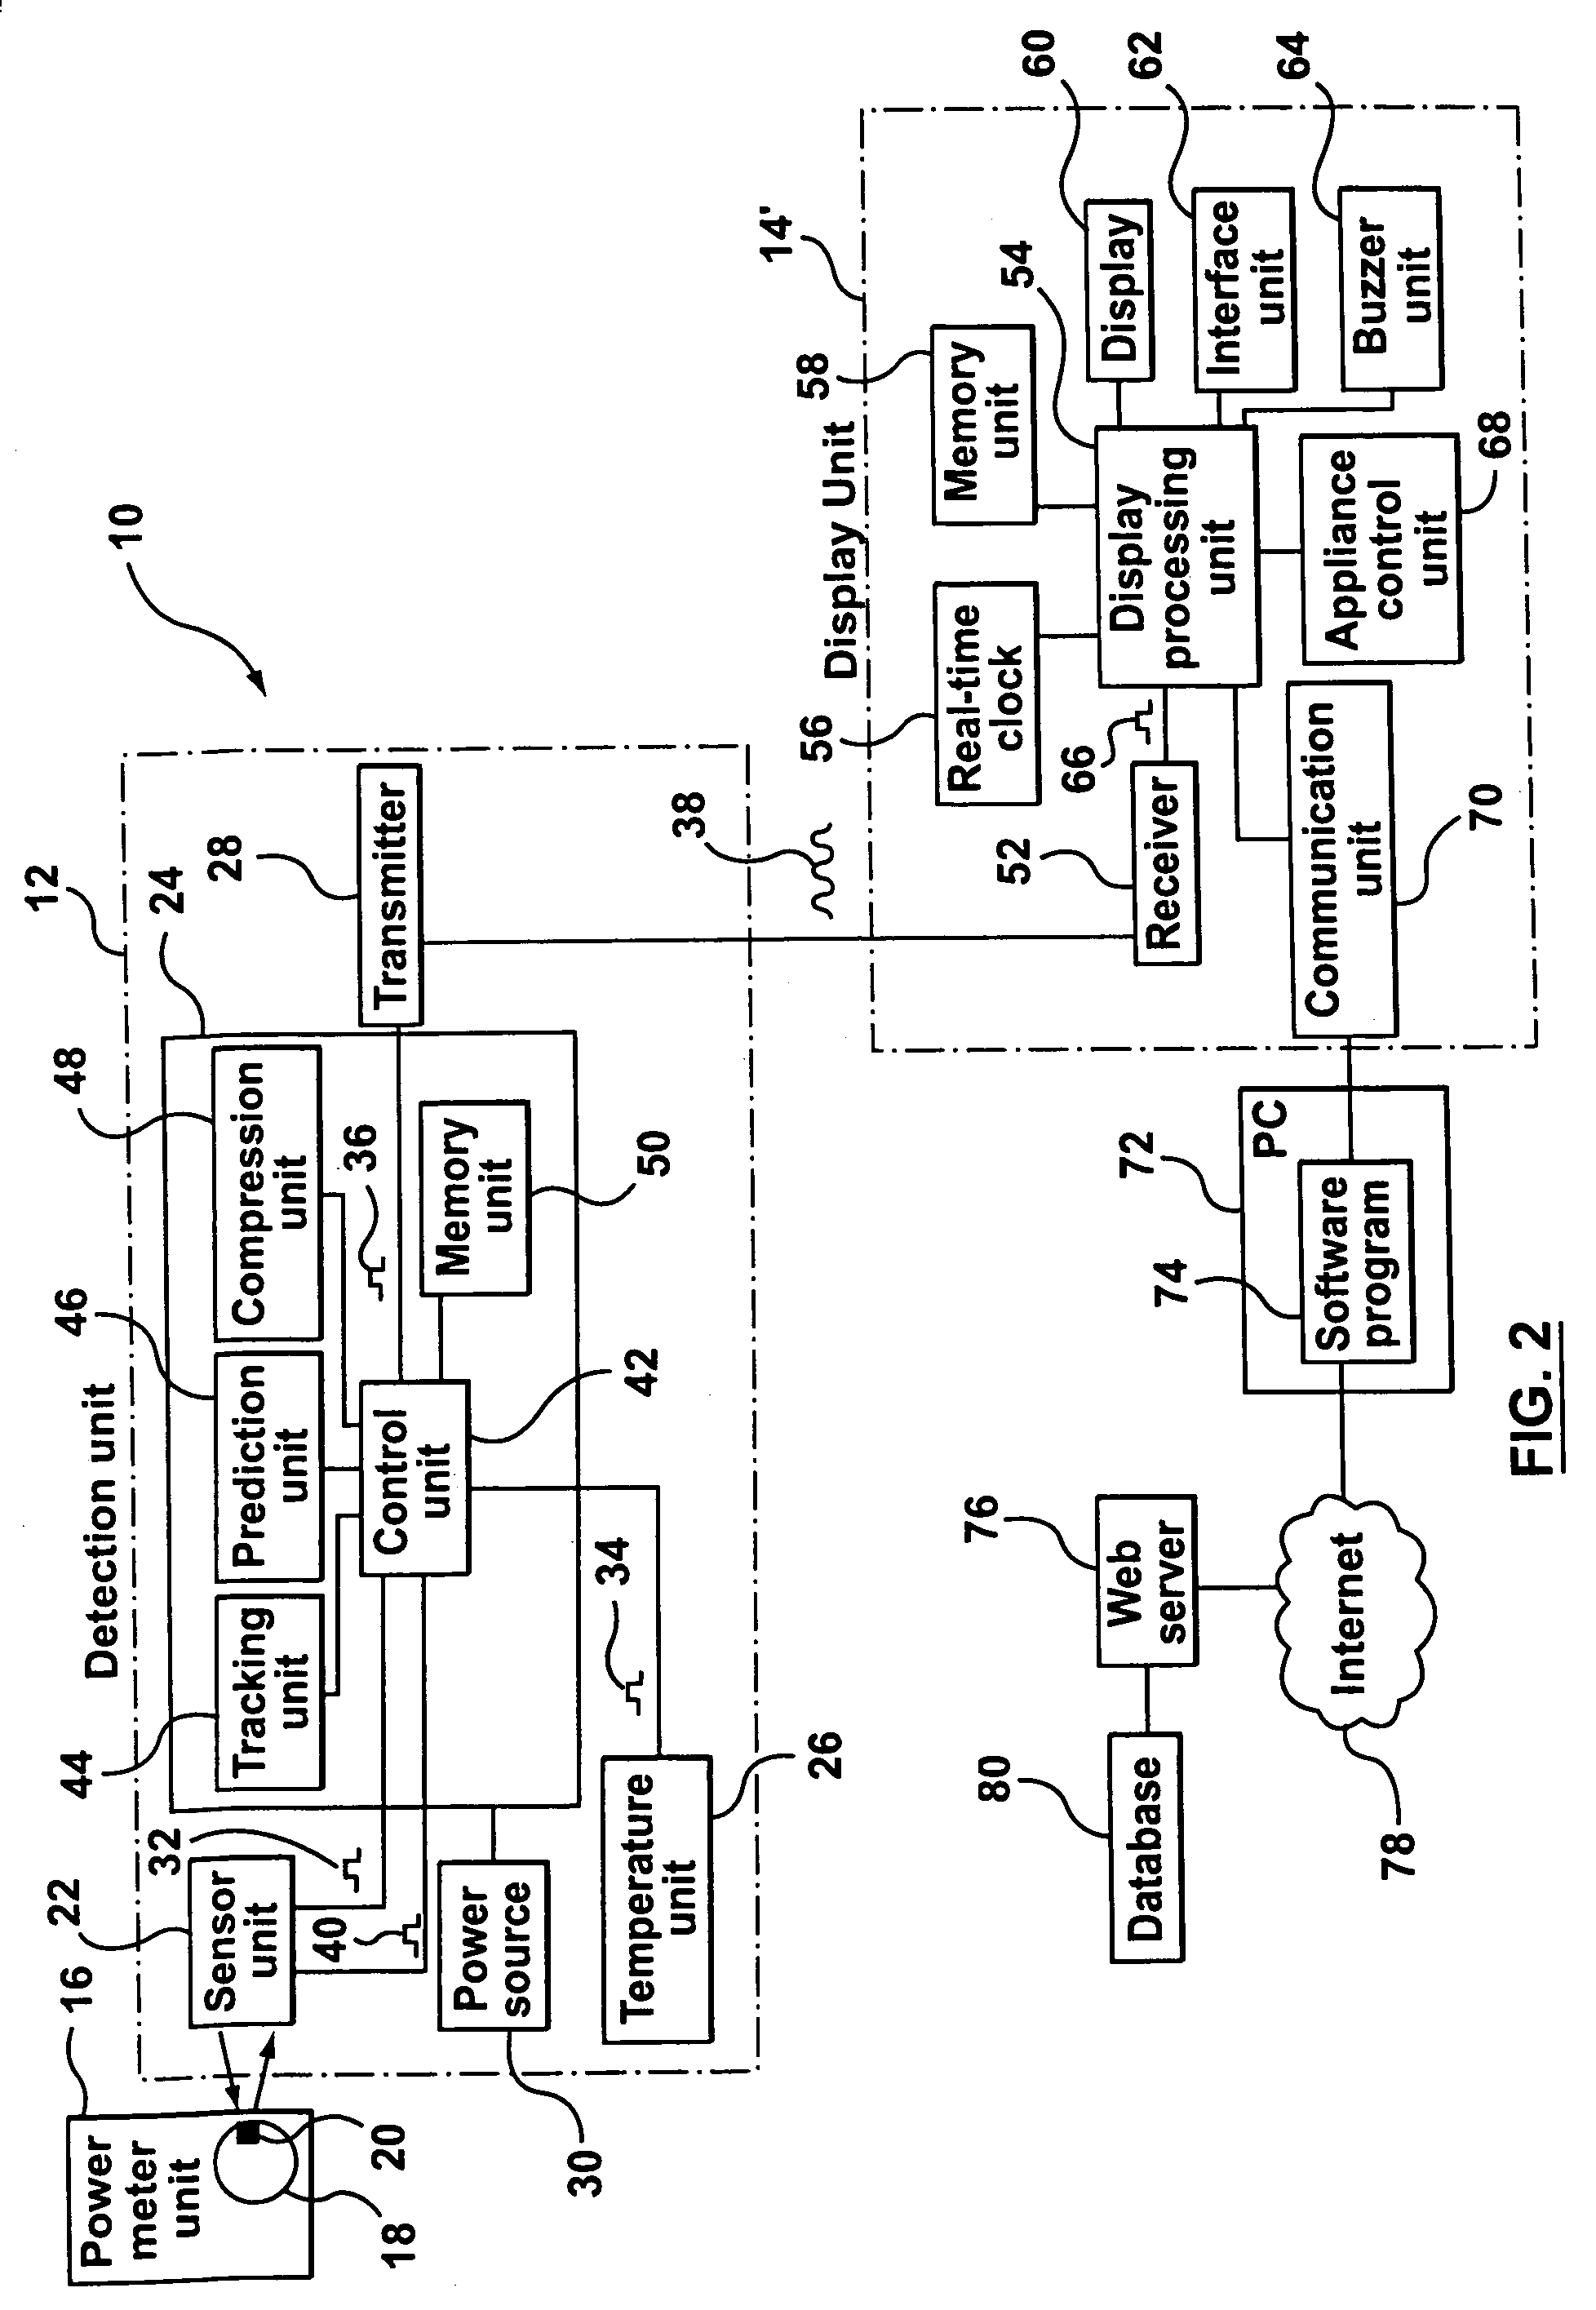 System and method for reading power meters